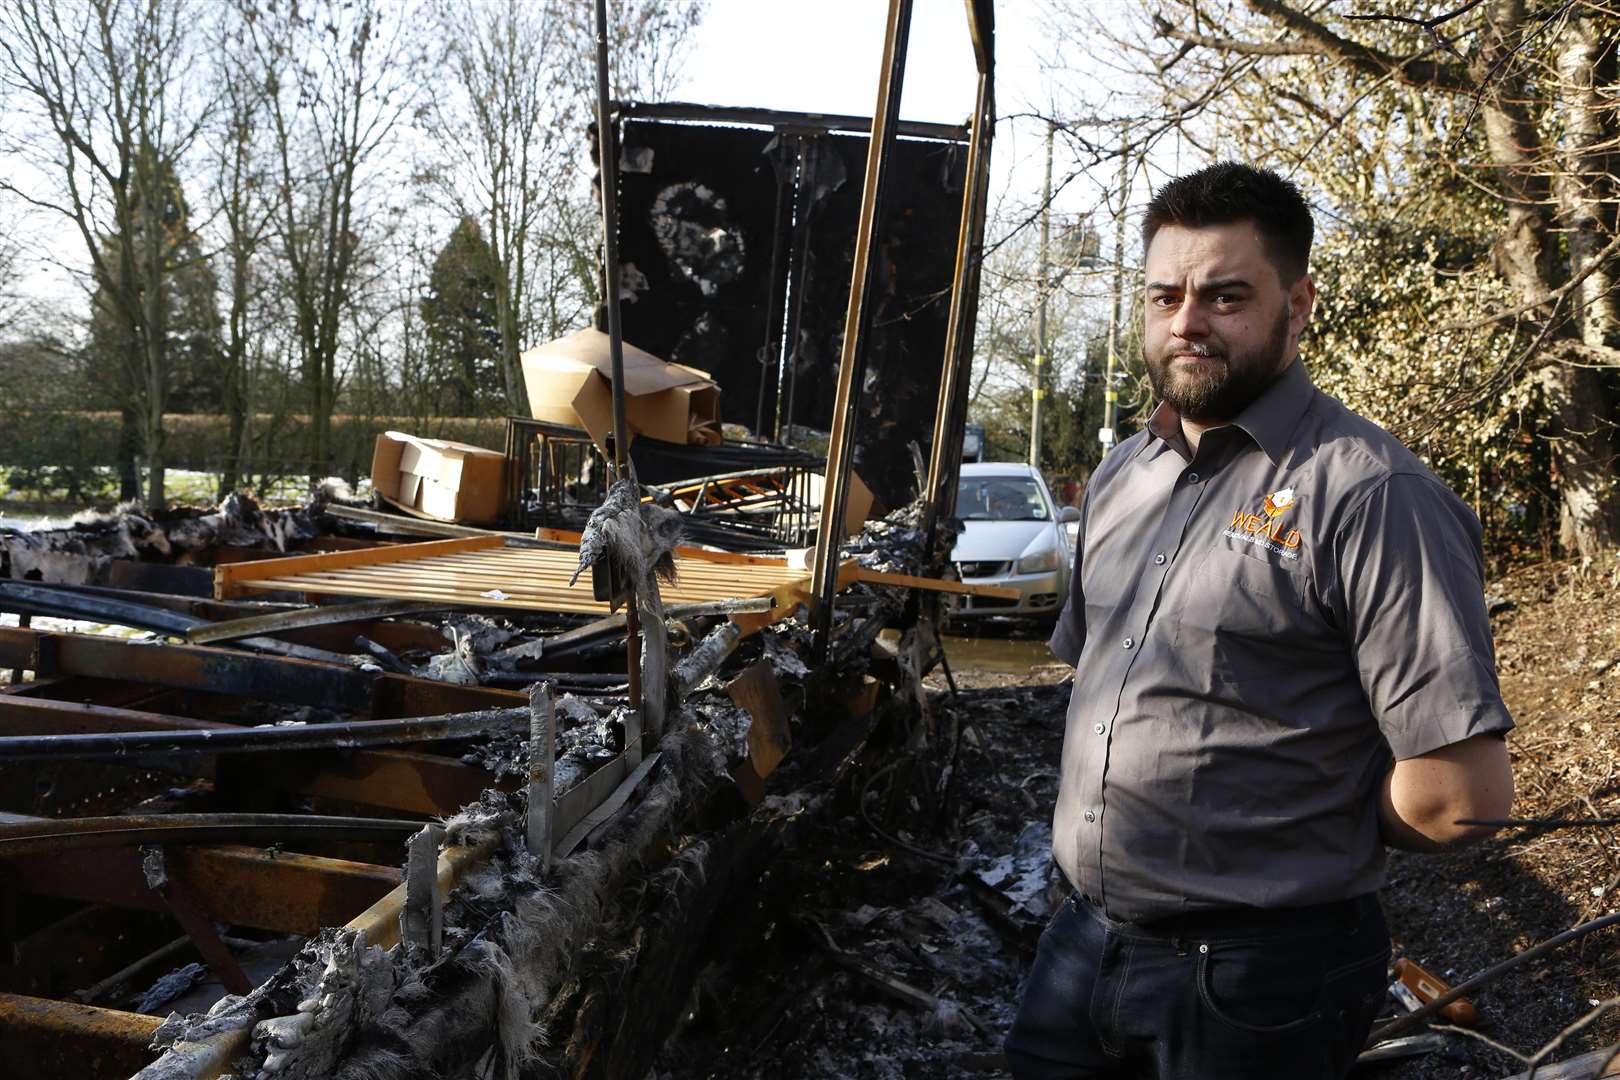 Luke Petty's removal business has been hit after a suspected arson attack. Picture: Andy Jones